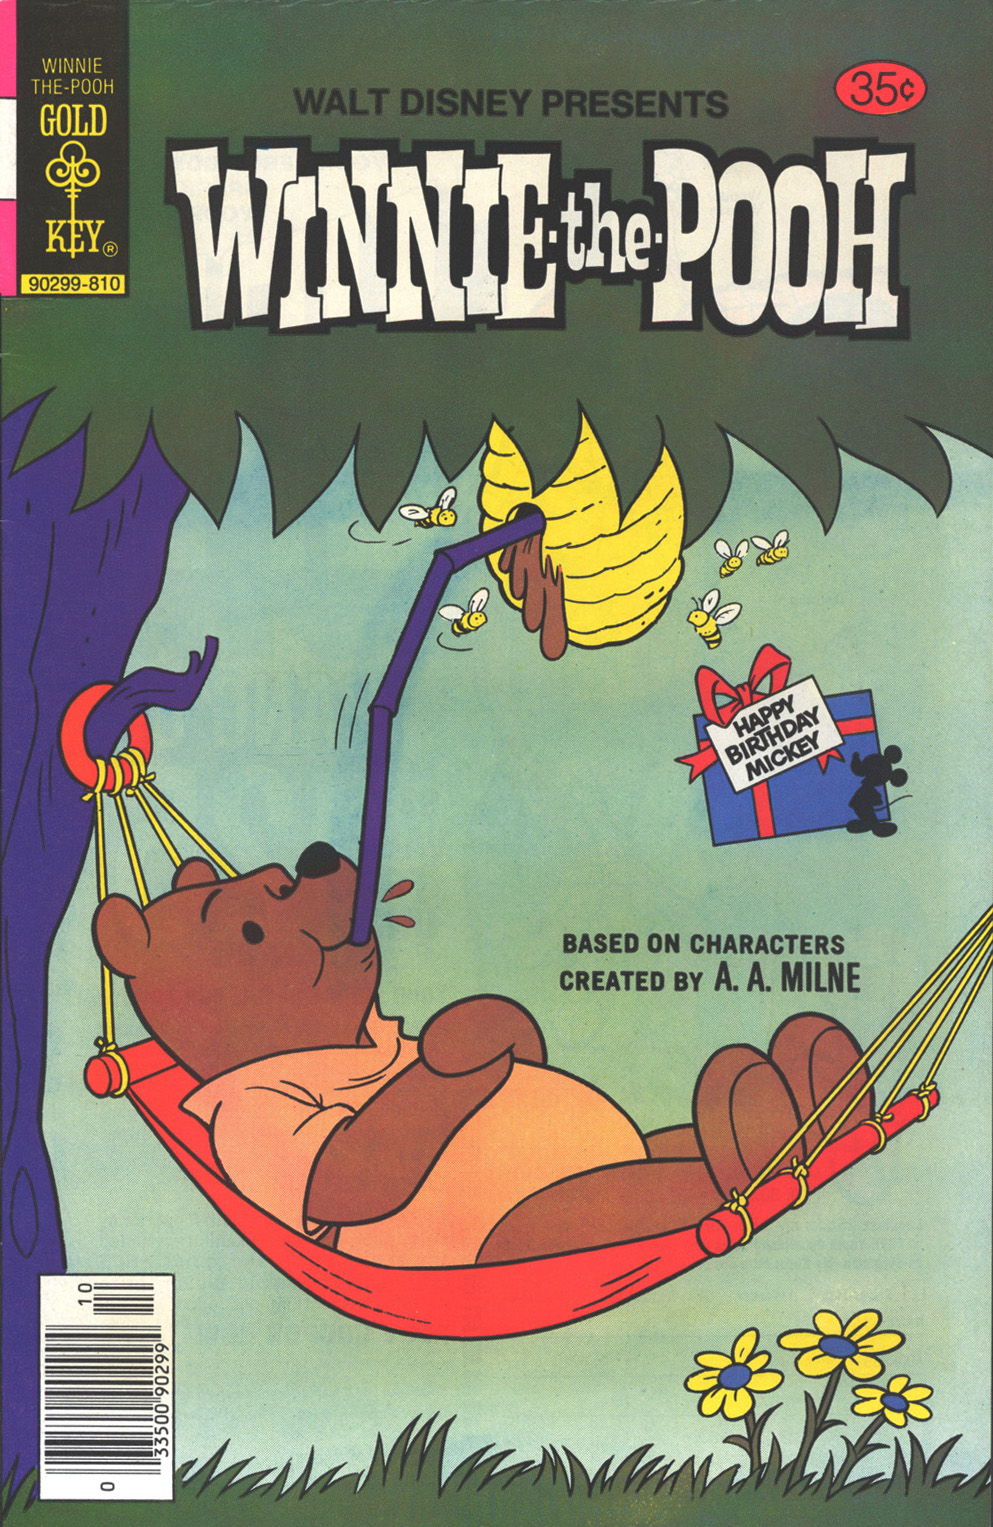 Read online Winnie-the-Pooh comic -  Issue #9 - 1